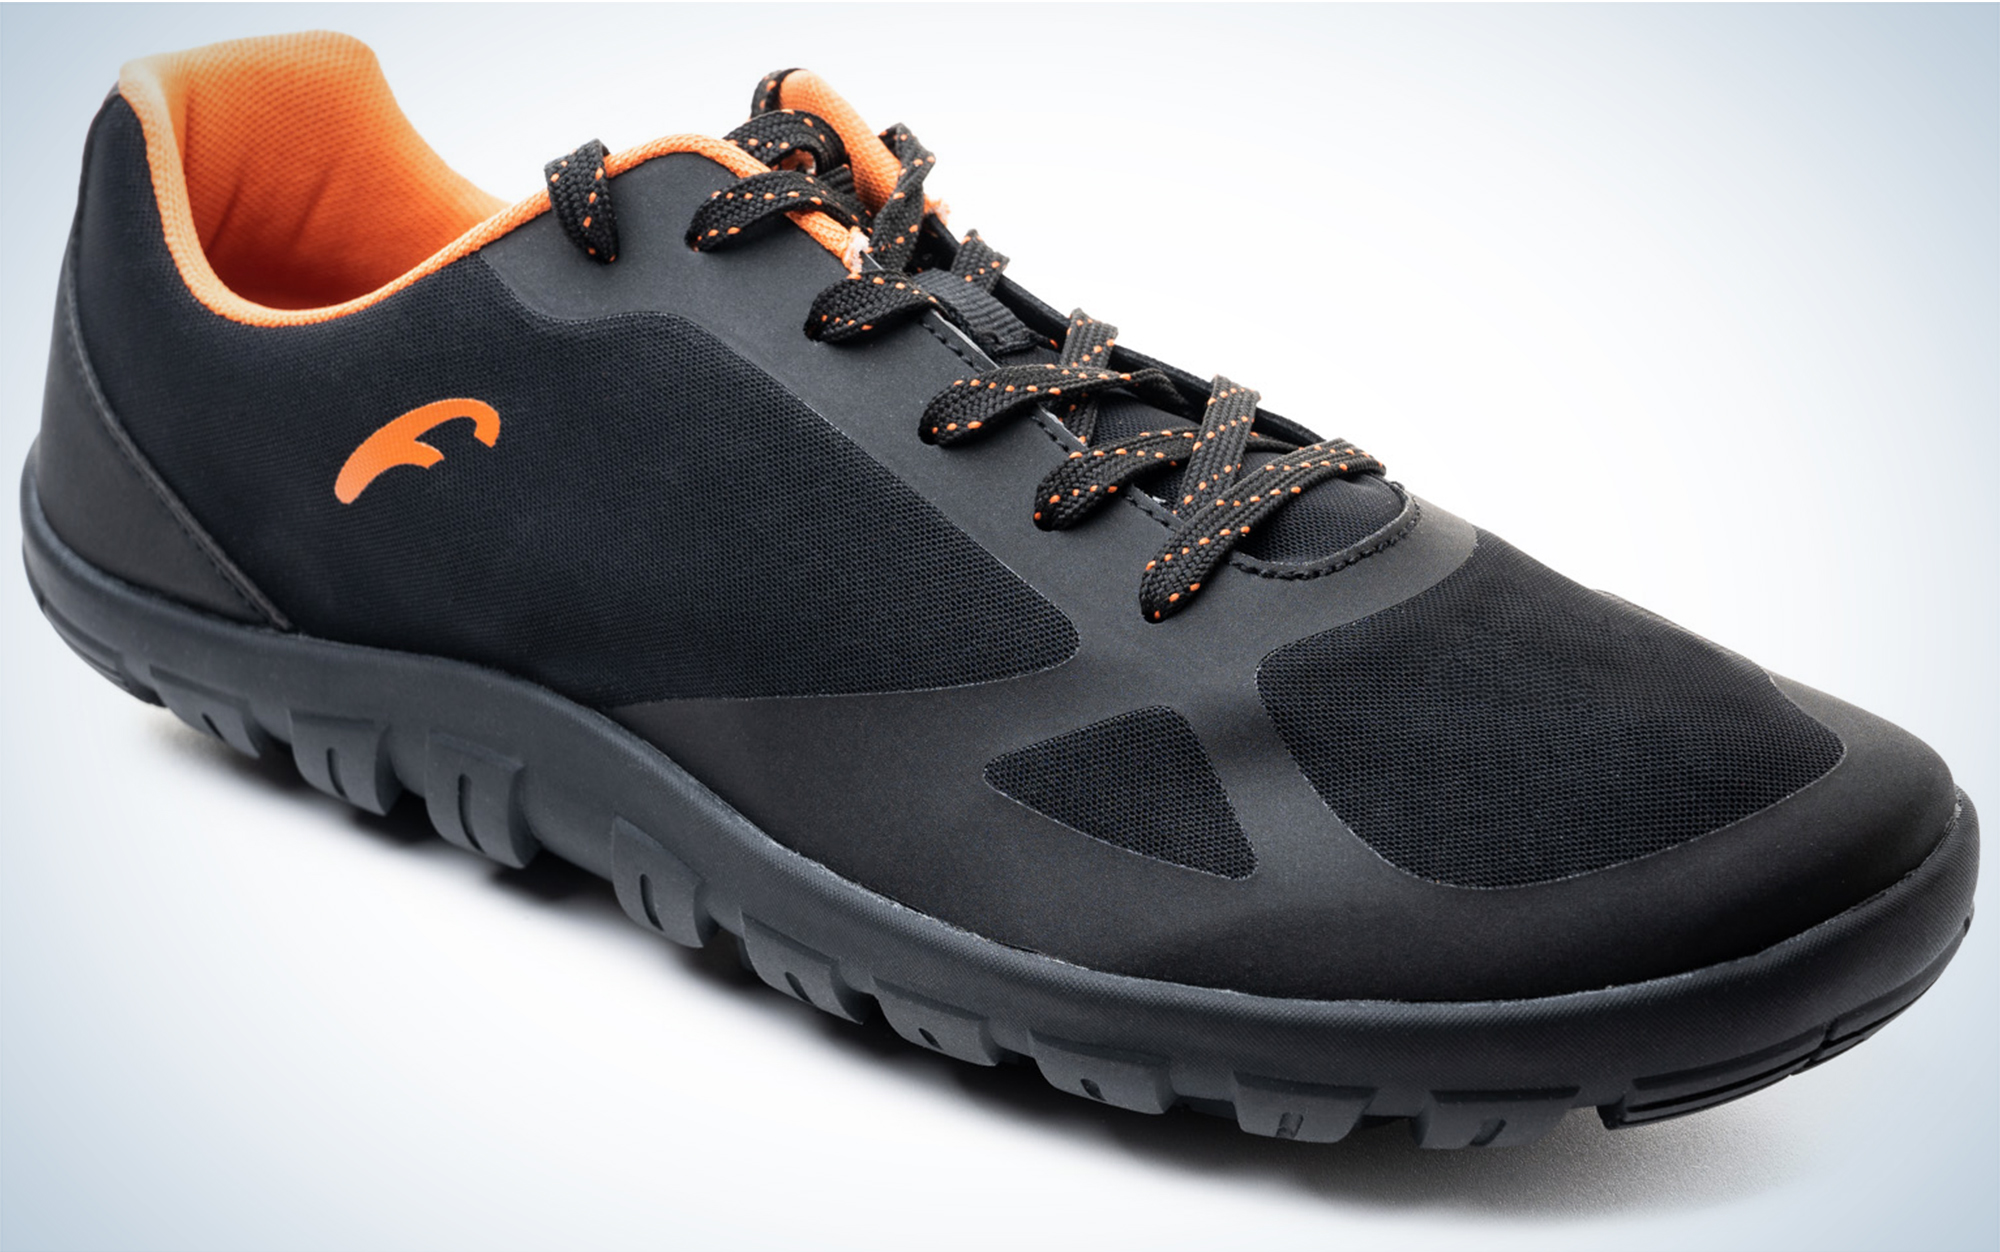 The Freet Feldom are the best minimalist trail runners for wide feet.